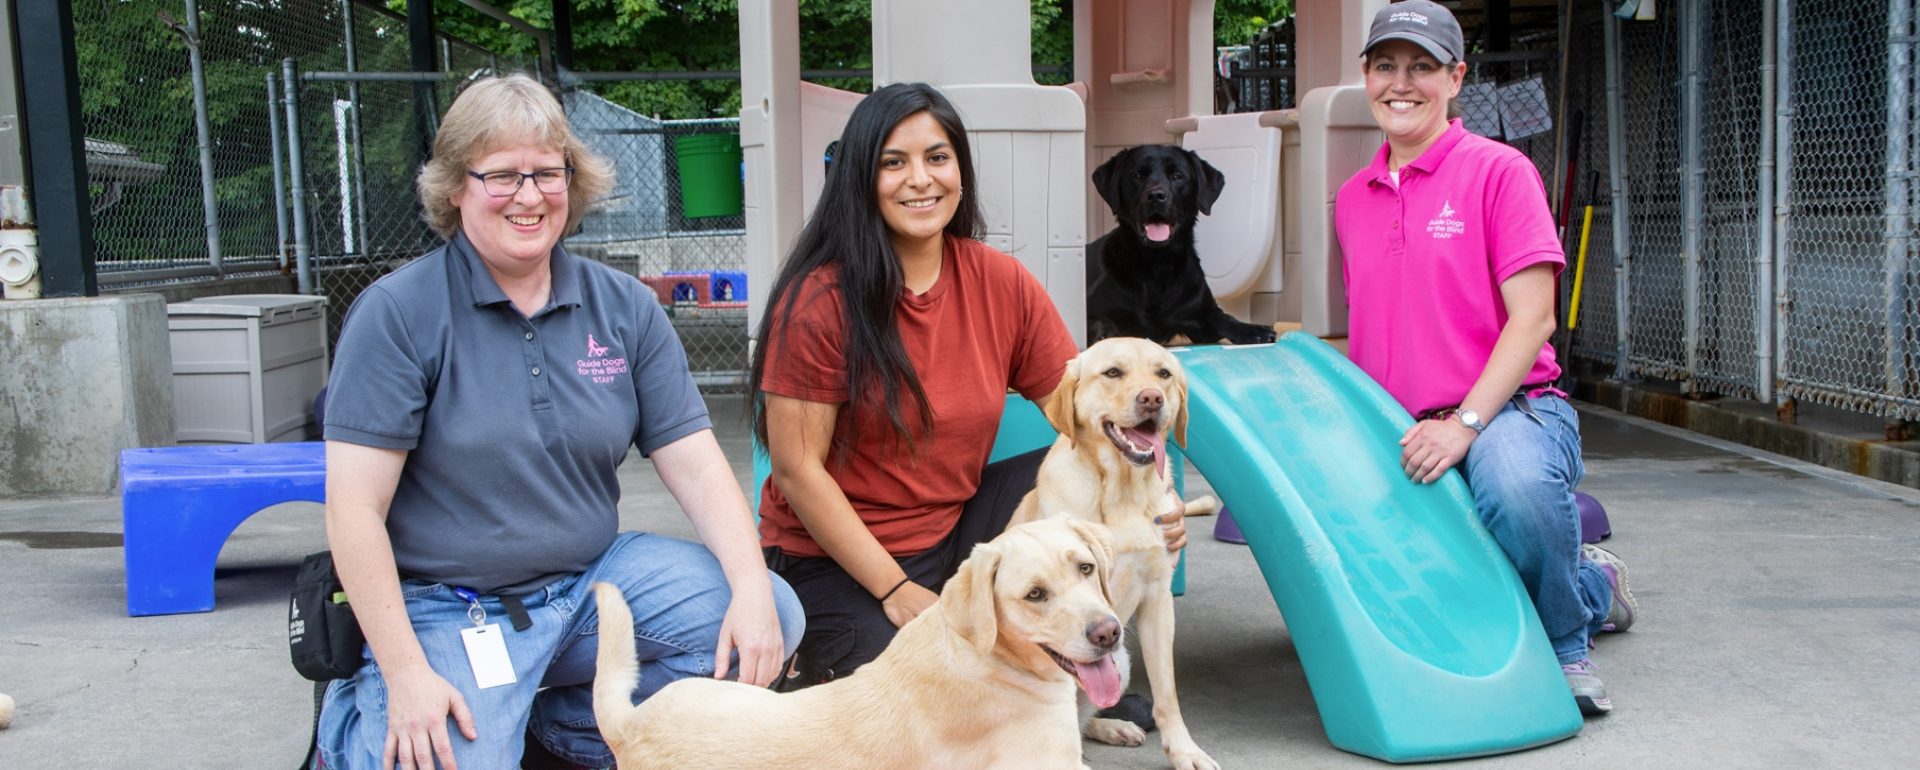 A trio of canine welfare training technicians posing with three dogs on some colorful play structures in our Oregon kennel complex.